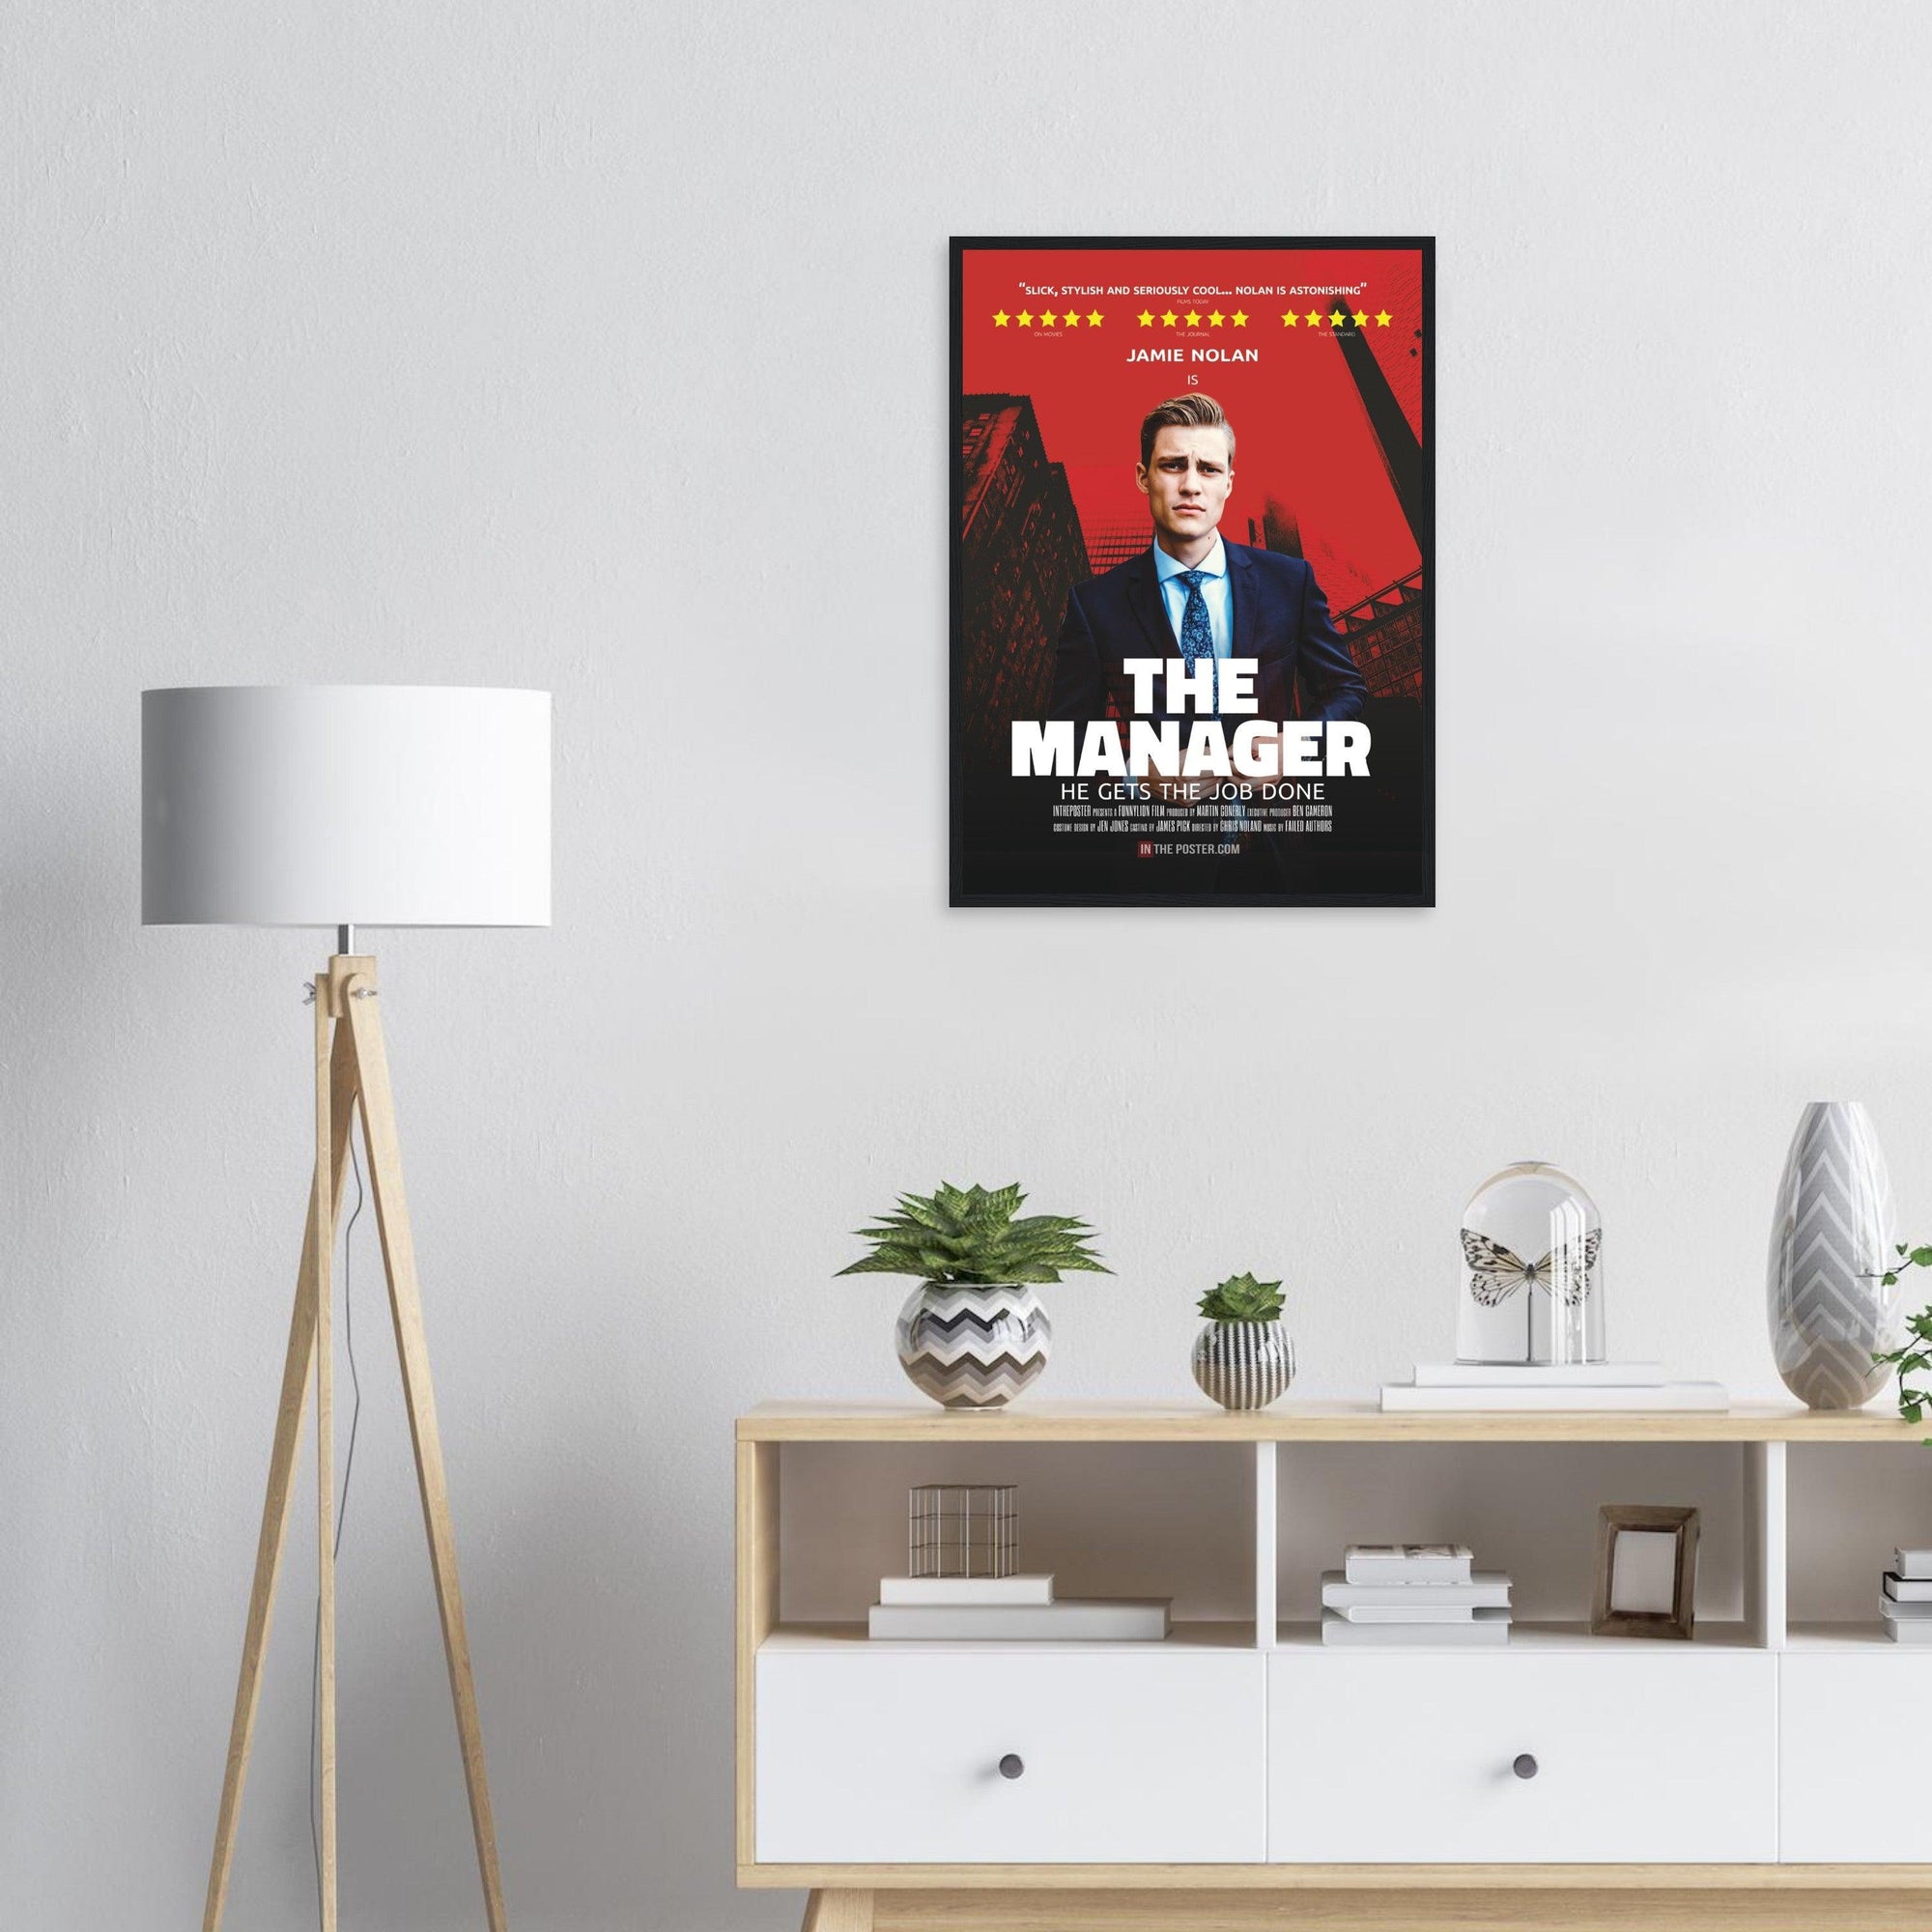 The Manager black regular framed movie poster on the wall above a cabinet and next to a stylish lamp